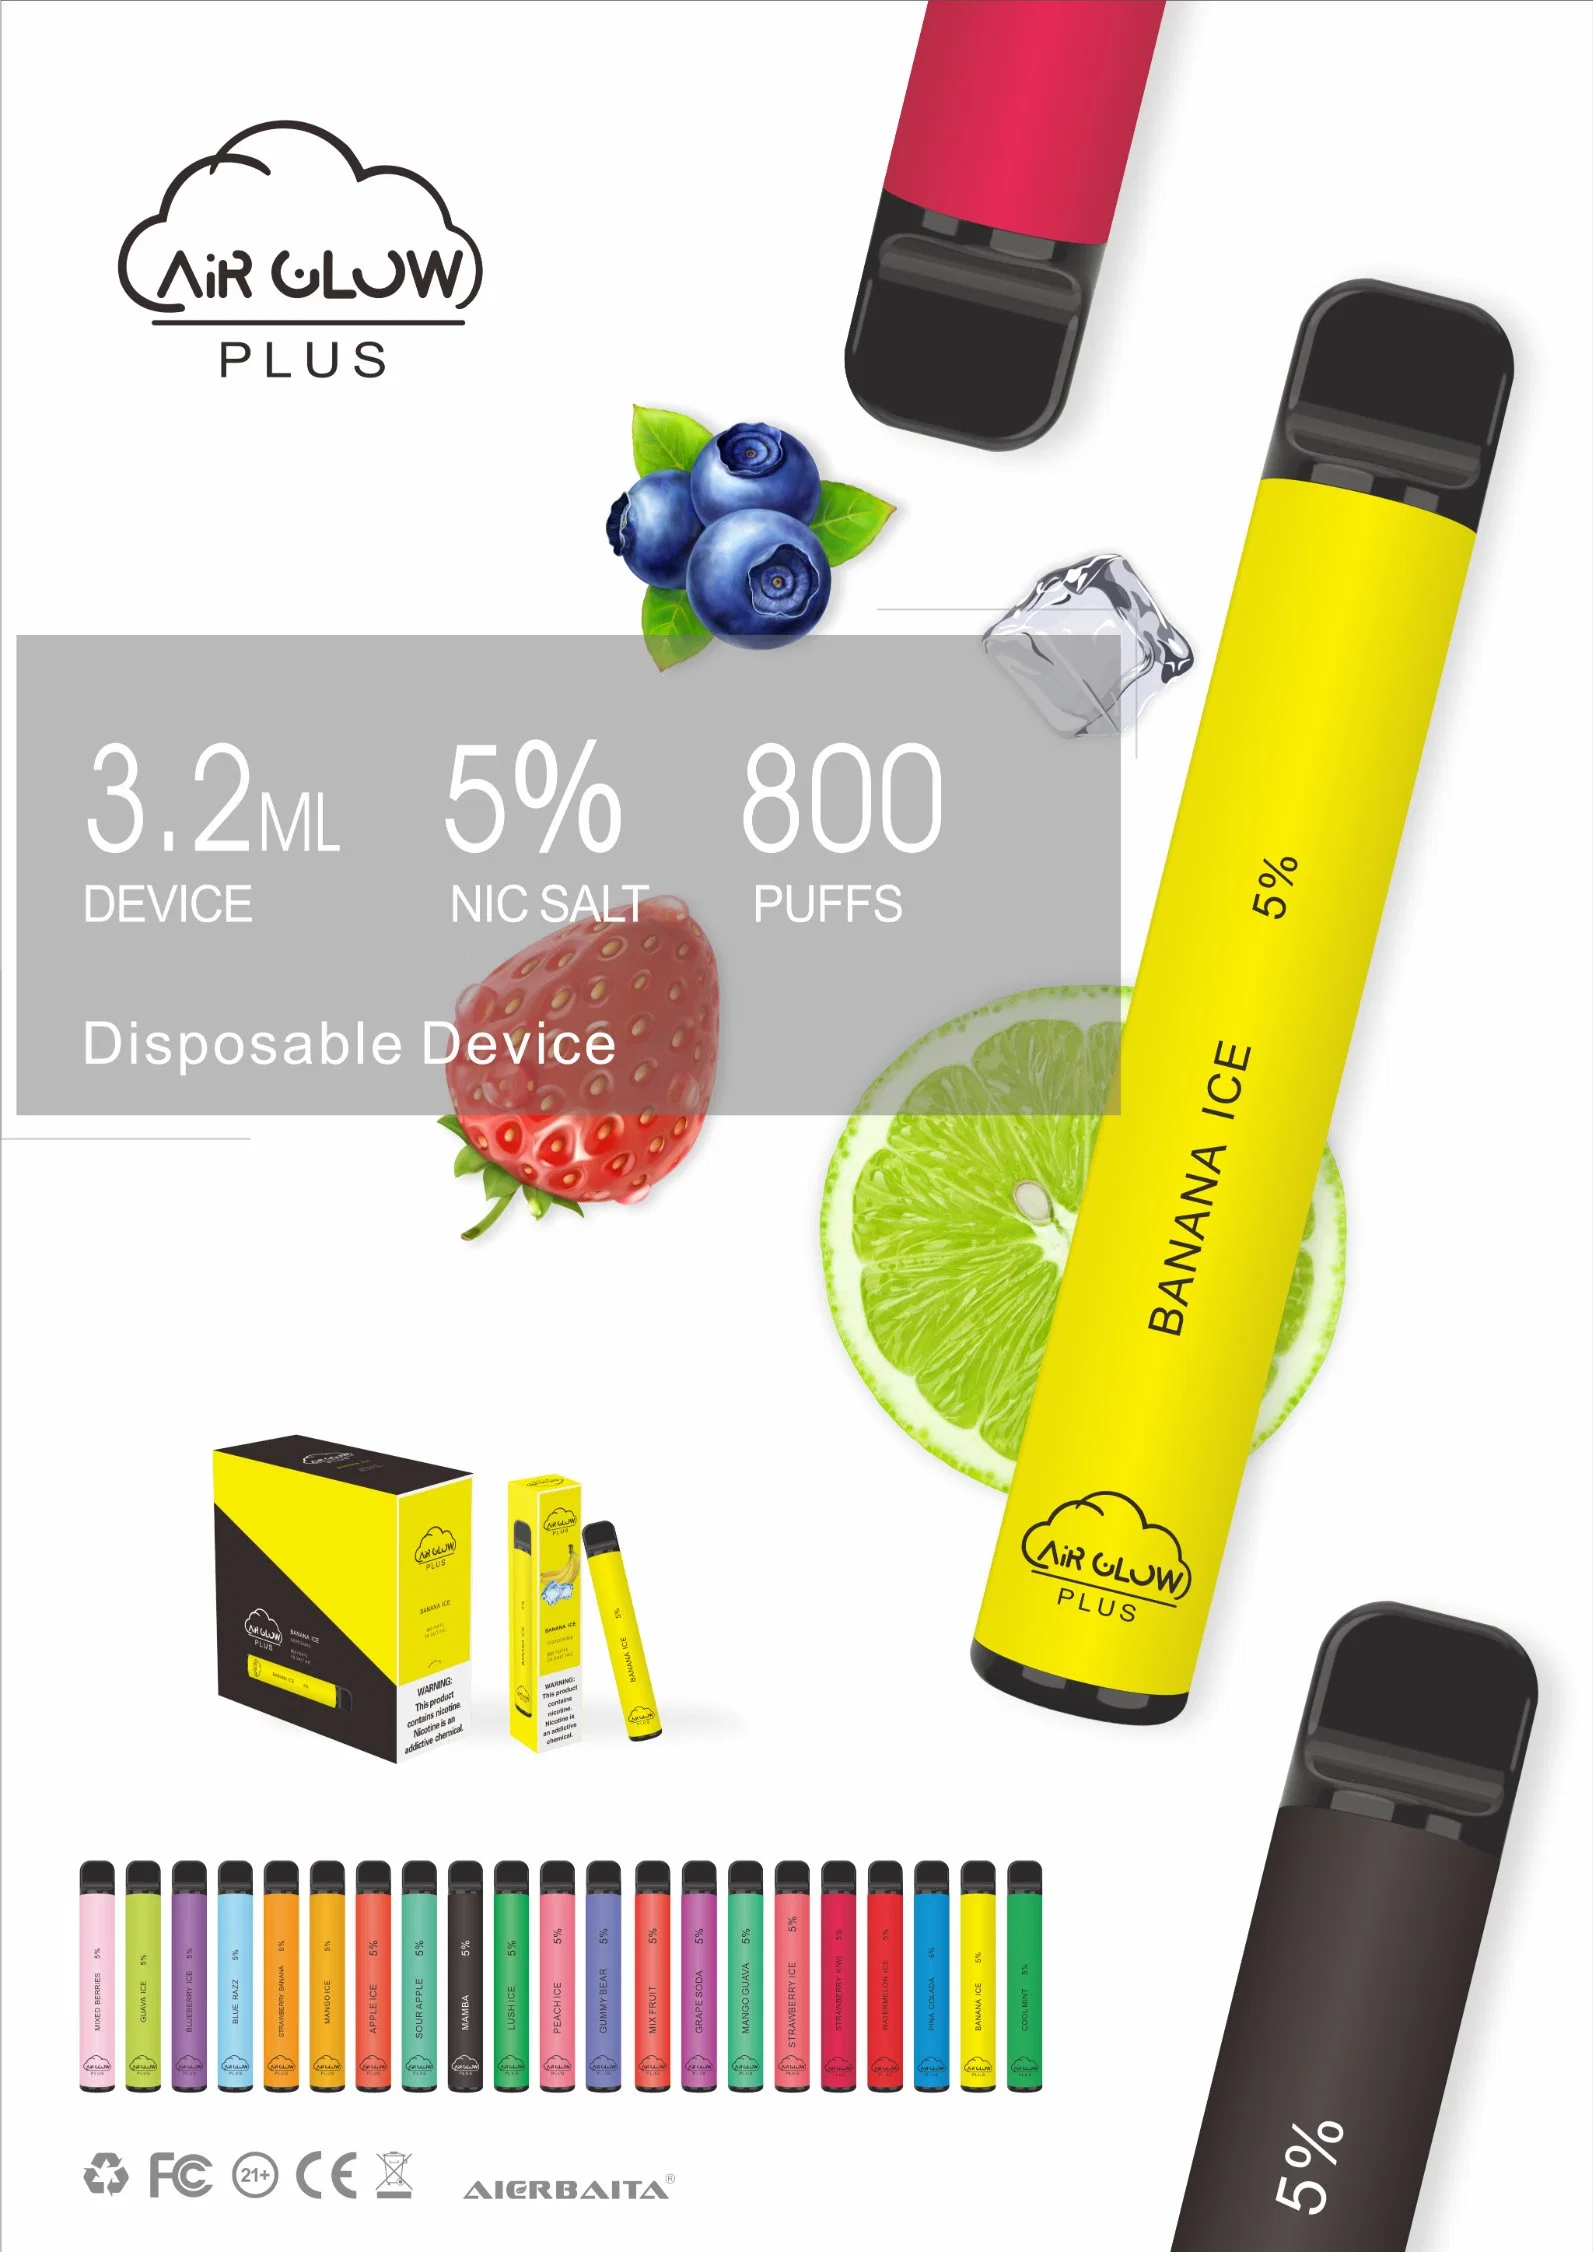 Hot Brand Selling Vape Pod Kit Electronic Cigarettes with 800 Puffs Health Cigarette with 5% Nicotine